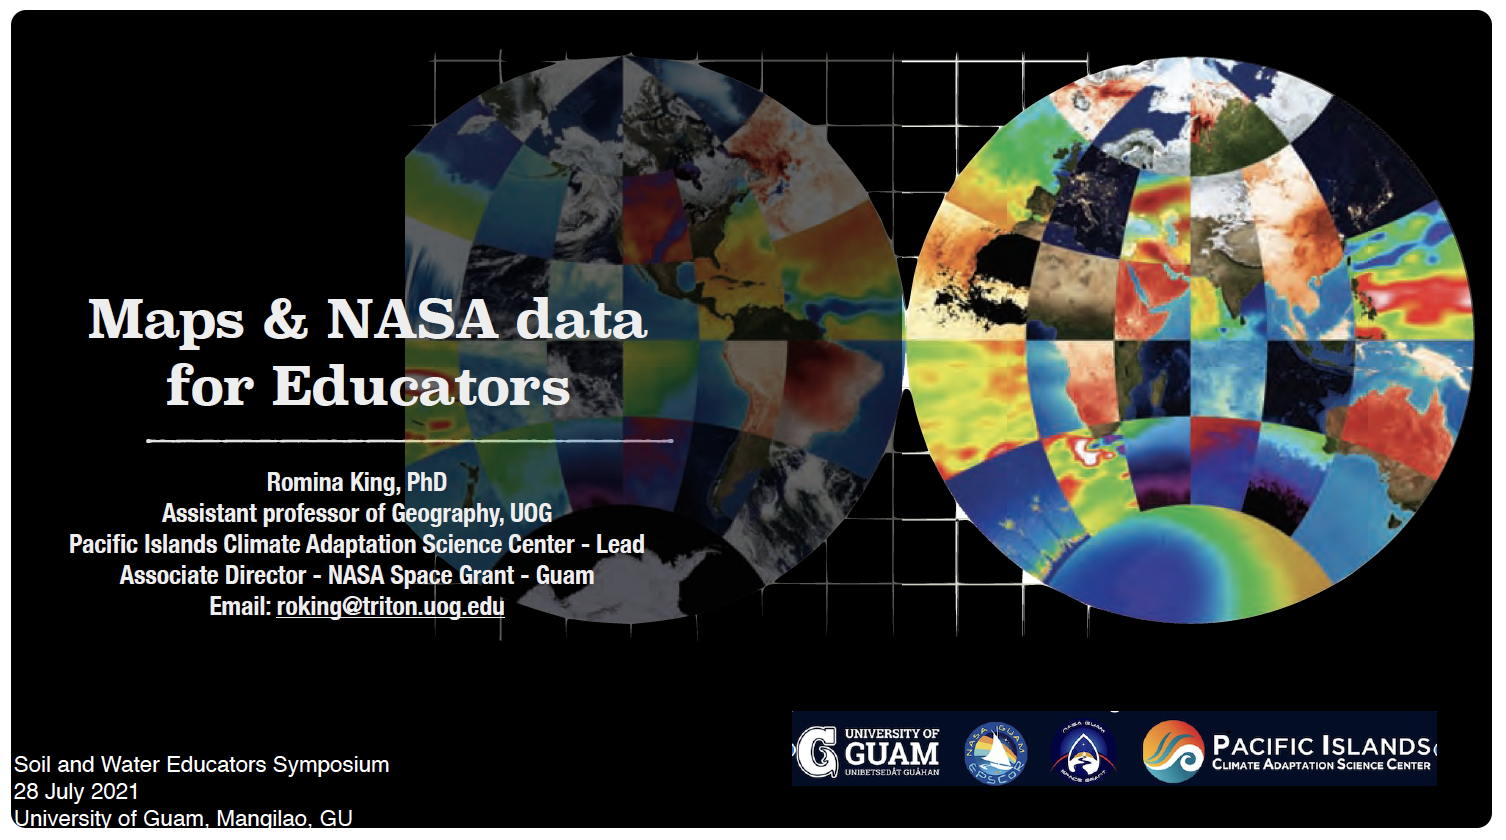 This is the title slide of the NASA Data for Educators presentation by Dr. Romina King.